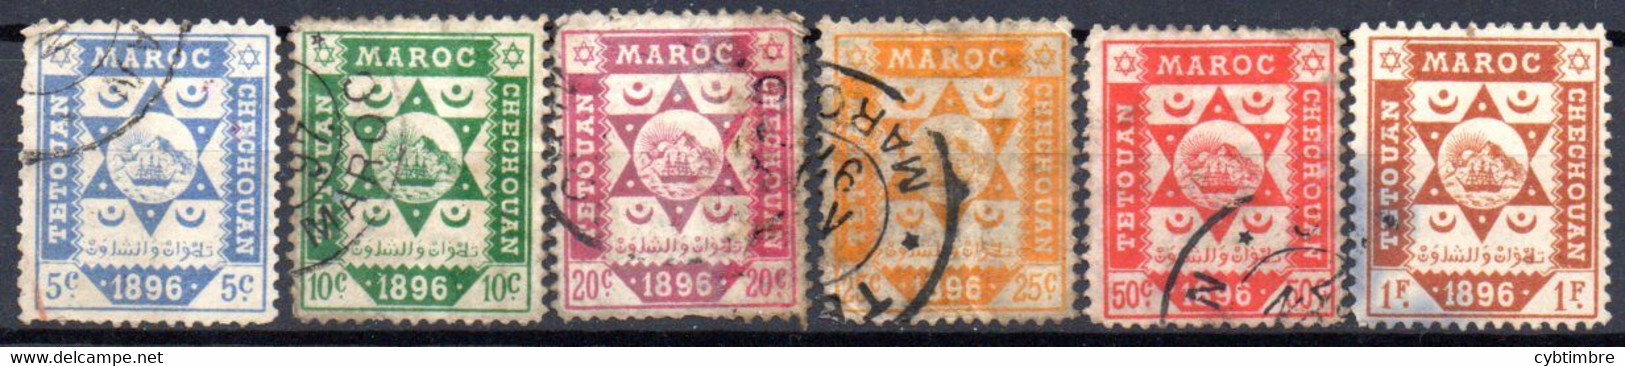 Maroc Postes Locales: Yvert N° 139/145; Sauf 143; Quelques Petites Imperfections - Locals & Carriers